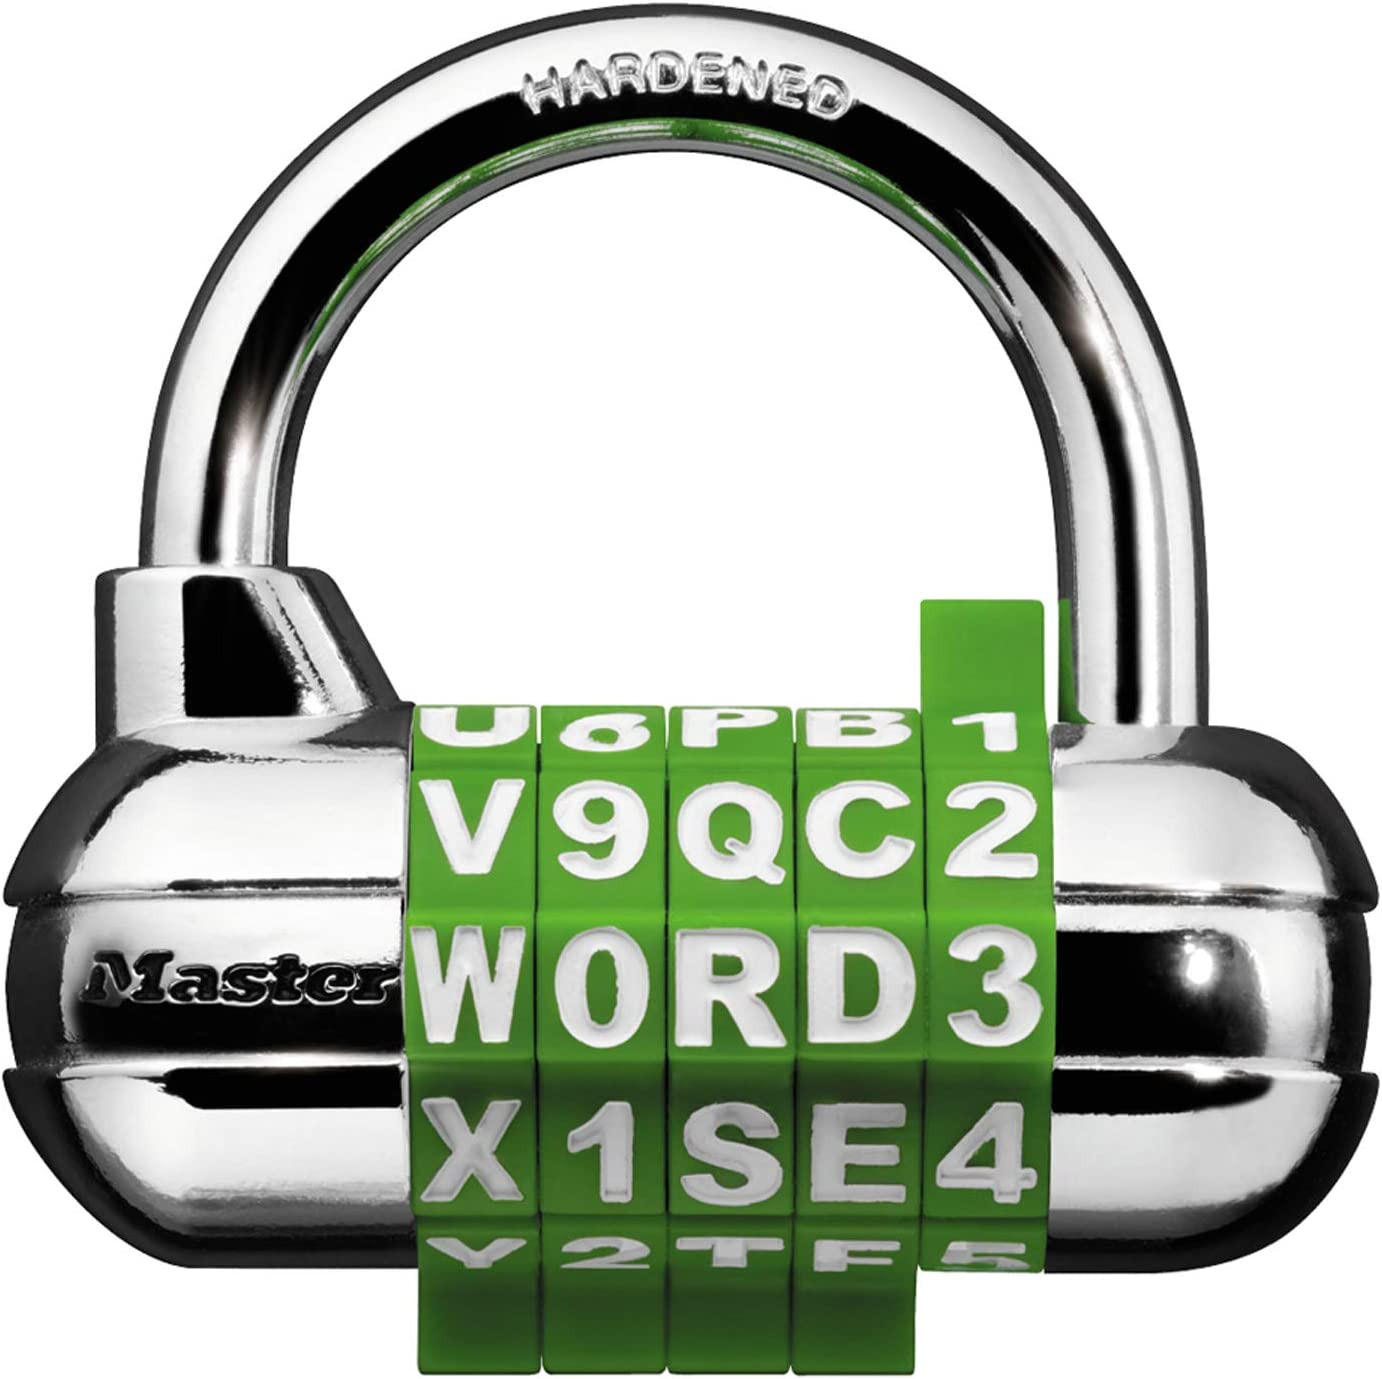 Master Lock Word Combination Lock, Set Your Own Word Combination Lock 